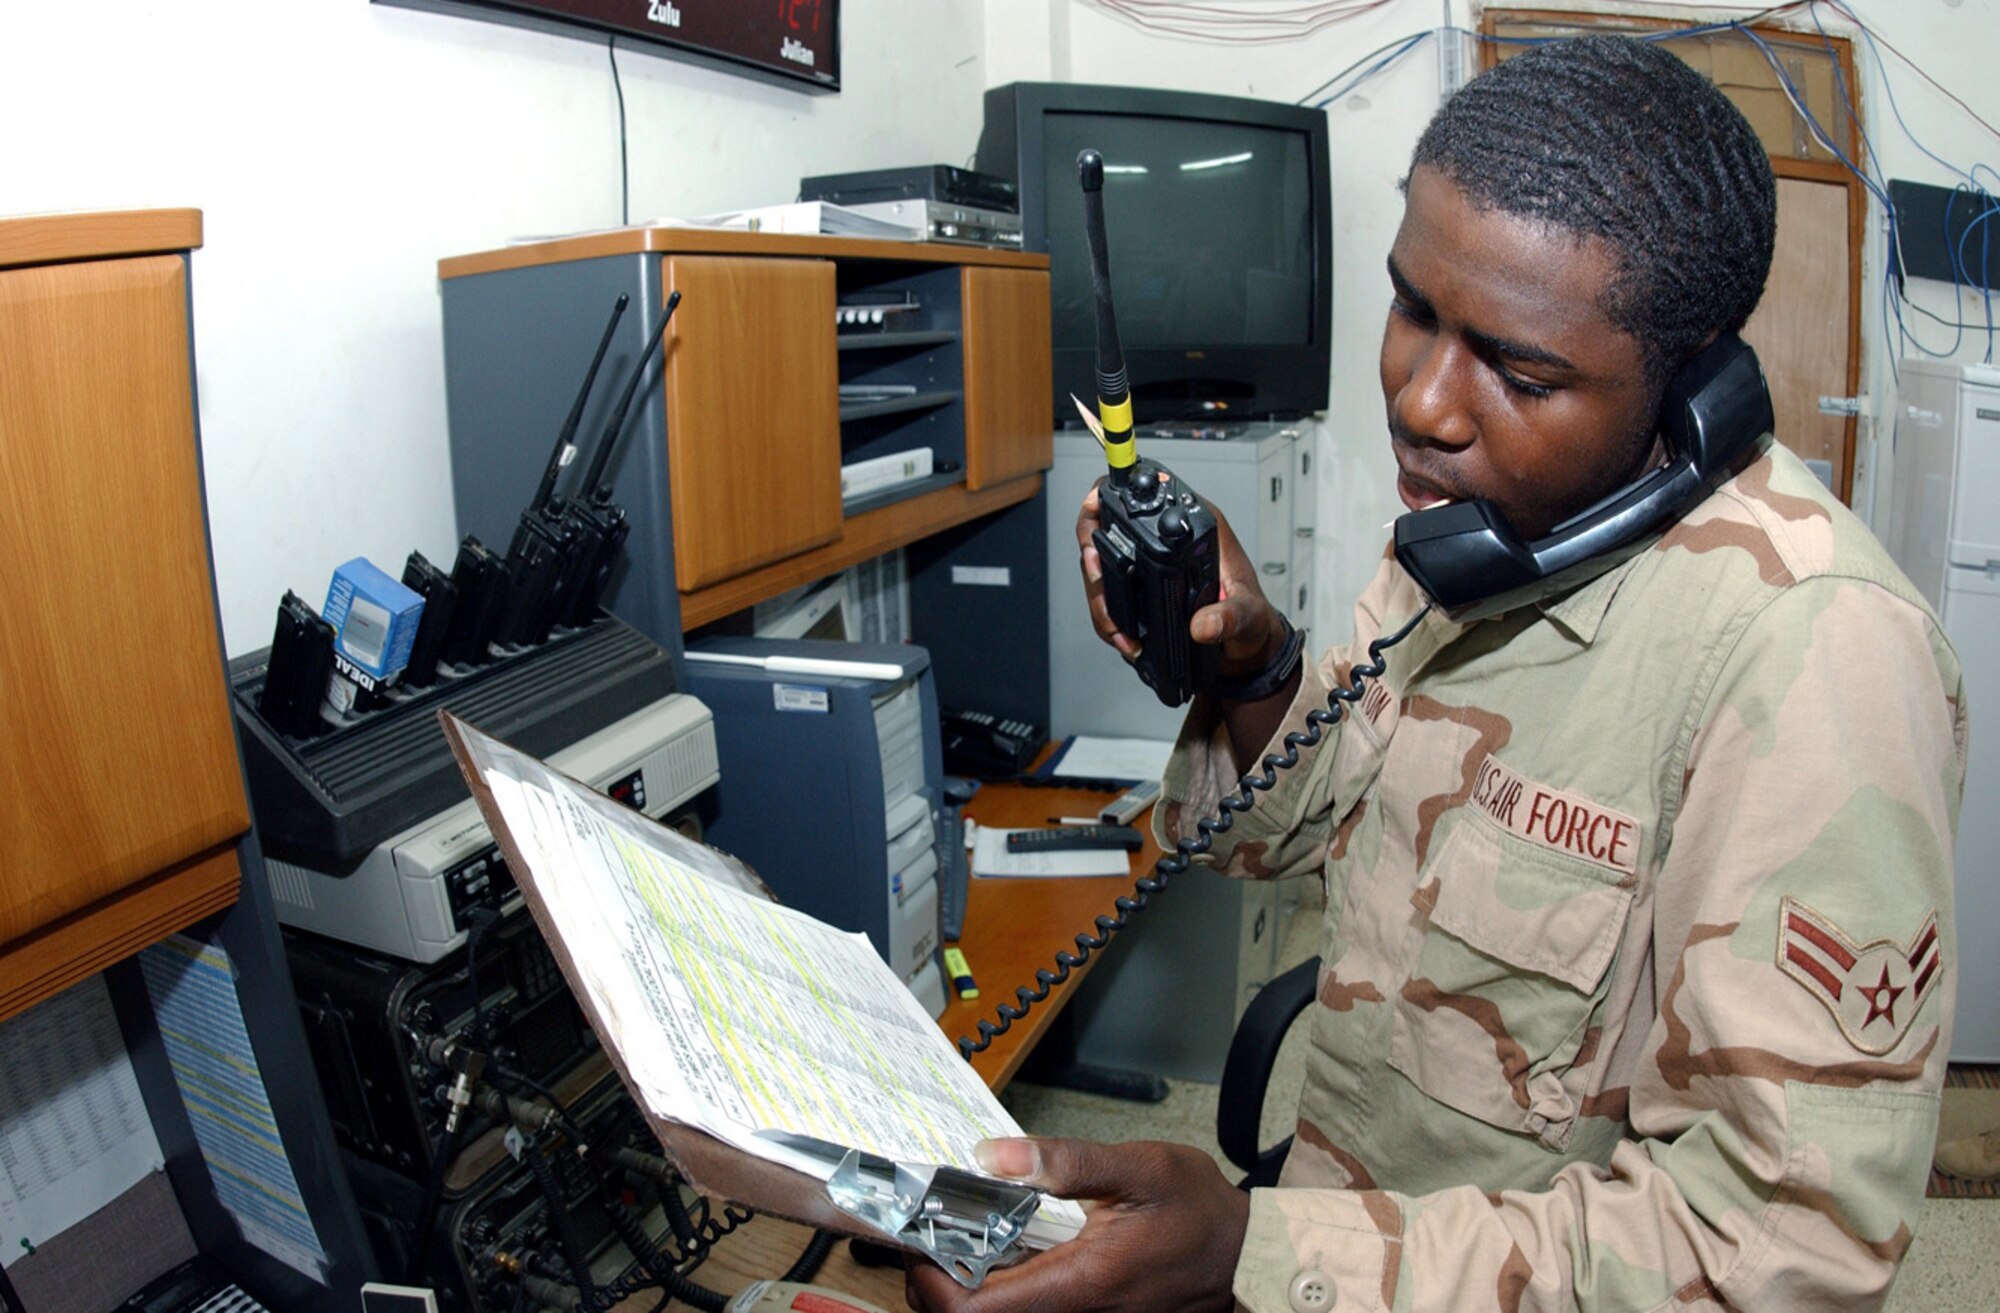 BALAD AIR BASE, Iraq -- Airman 1st Class Kevin Preston Jr. relays information from an aircrew to maintainers.  He is an emergency action controller with the 322nd Air Expeditionary Wing's command post here and is deployed from Cannon Air Force Base, N.M.  (U.S. Air Force photo by Master Sgt. Jon Hanson)